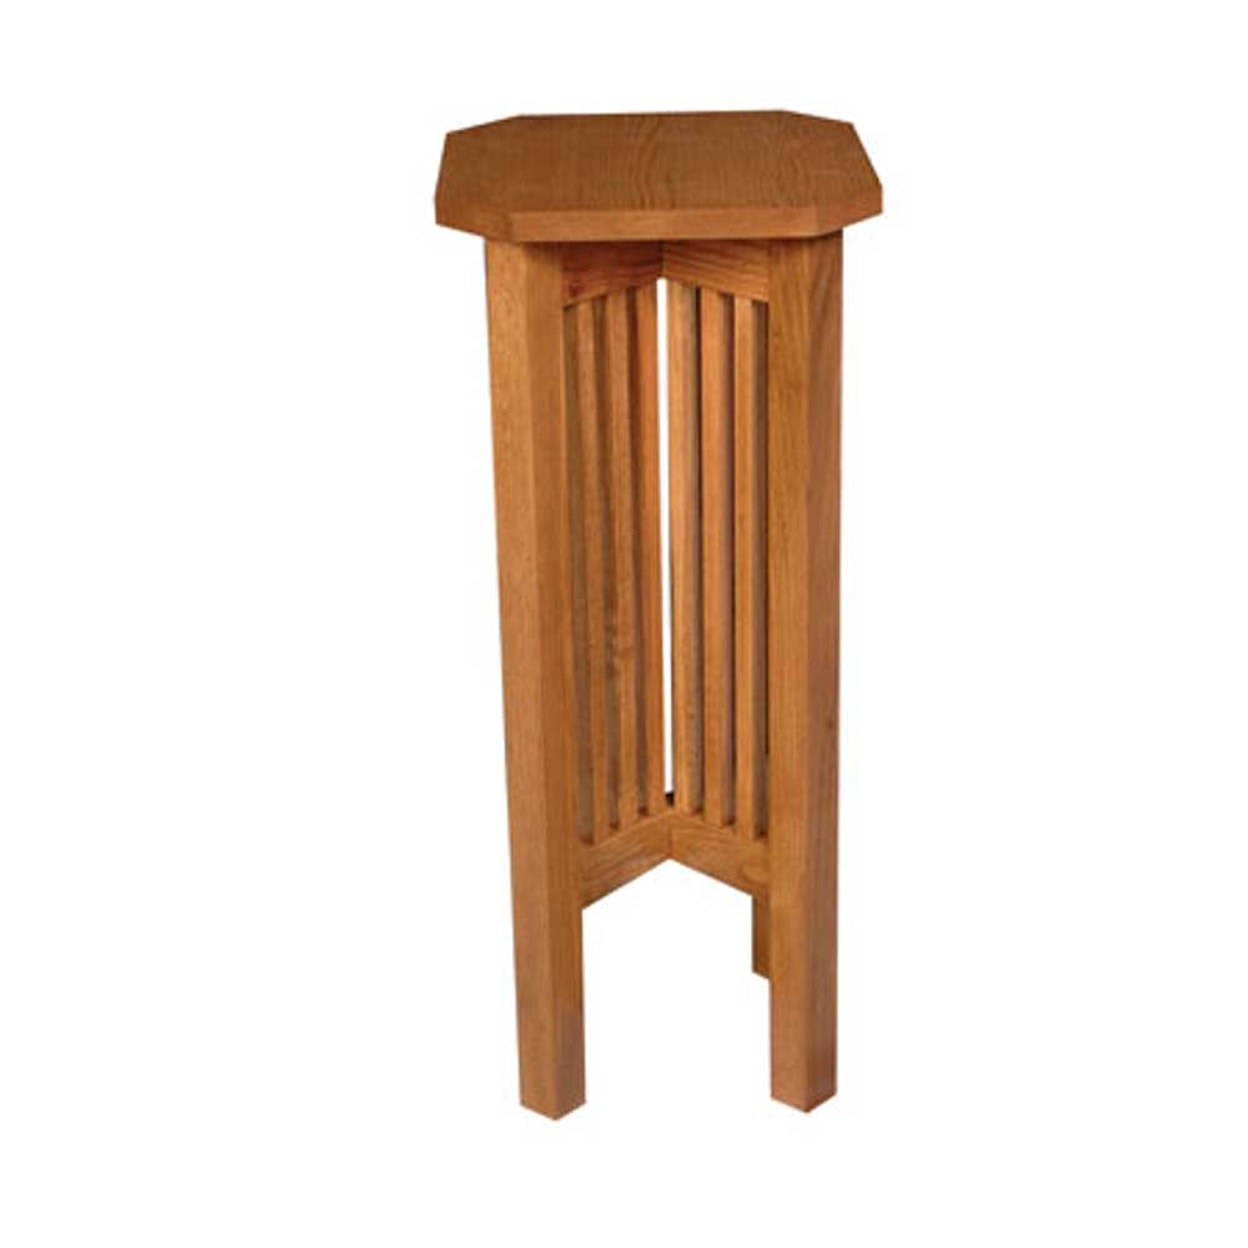 Simply Amish Prairie Mission Plant Stand